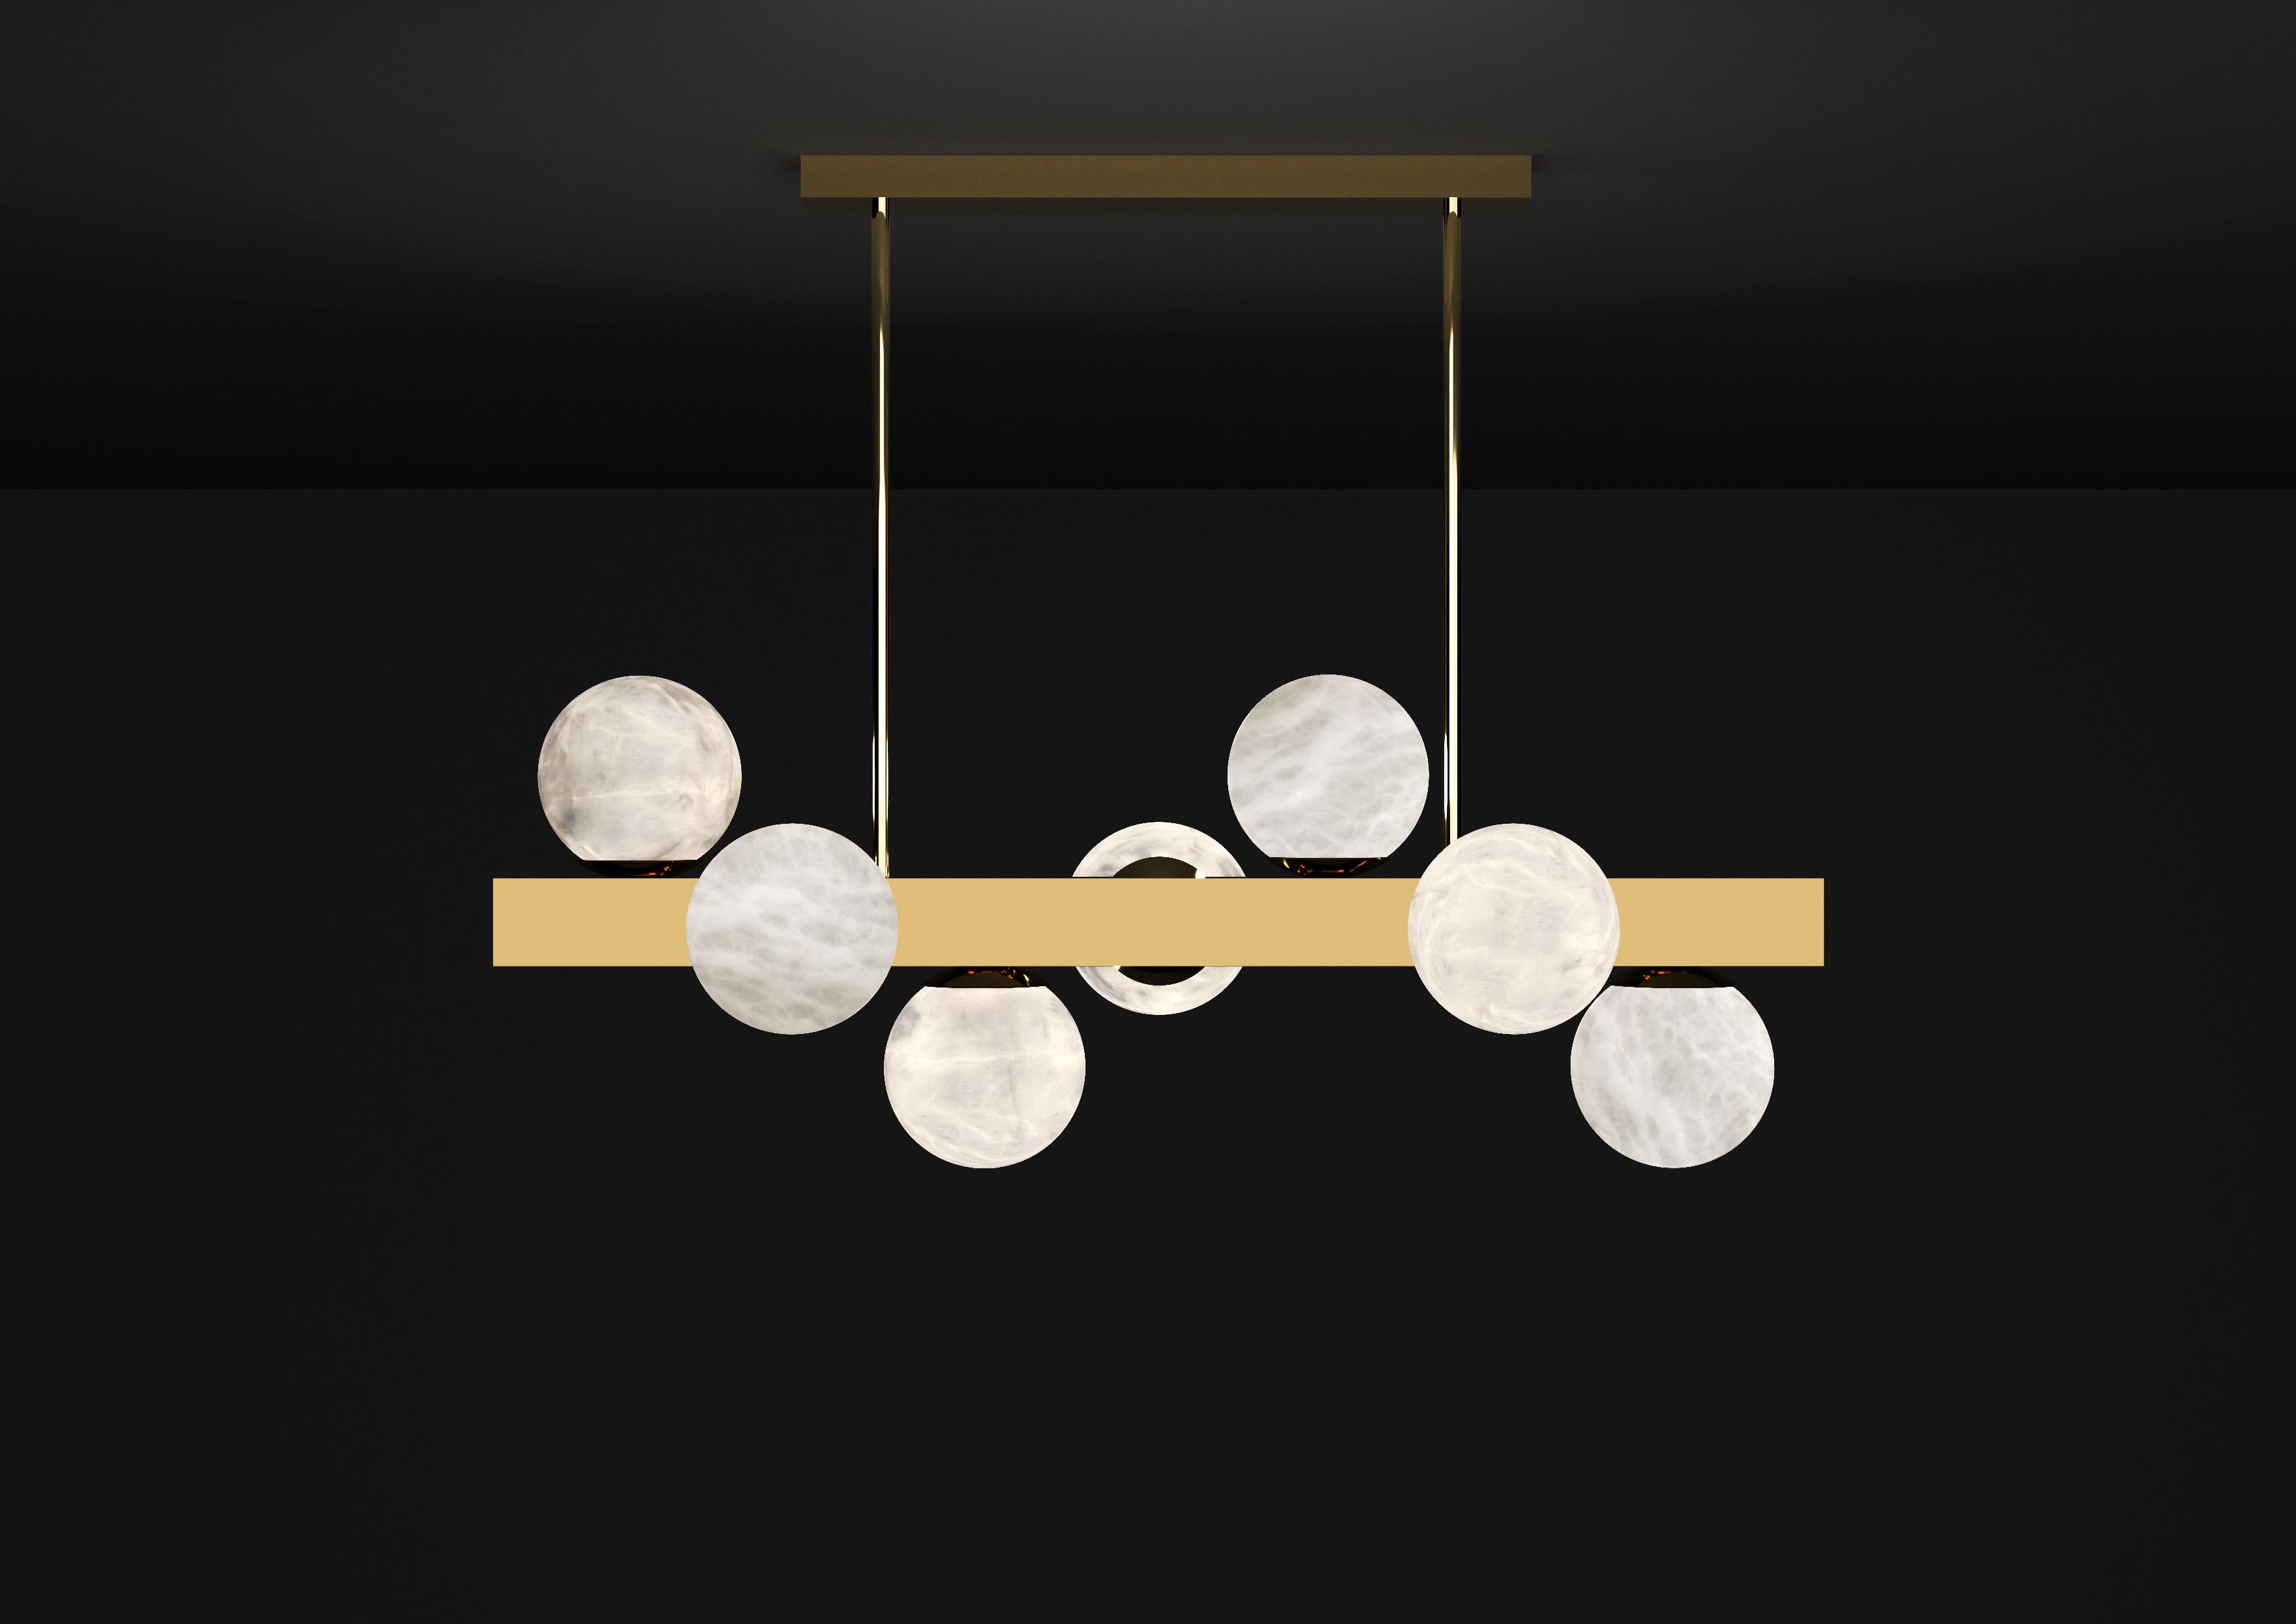 Dioniso Shiny Gold Metal Pendant Lamp by Alabastro Italiano
Dimensions: D 35 x W 91 x H 36 cm.
Materials: White alabaster and metal.

Available in different finishes: Shiny Silver, Bronze, Brushed Brass, Ruggine of Florence, Brushed Burnished, Shiny